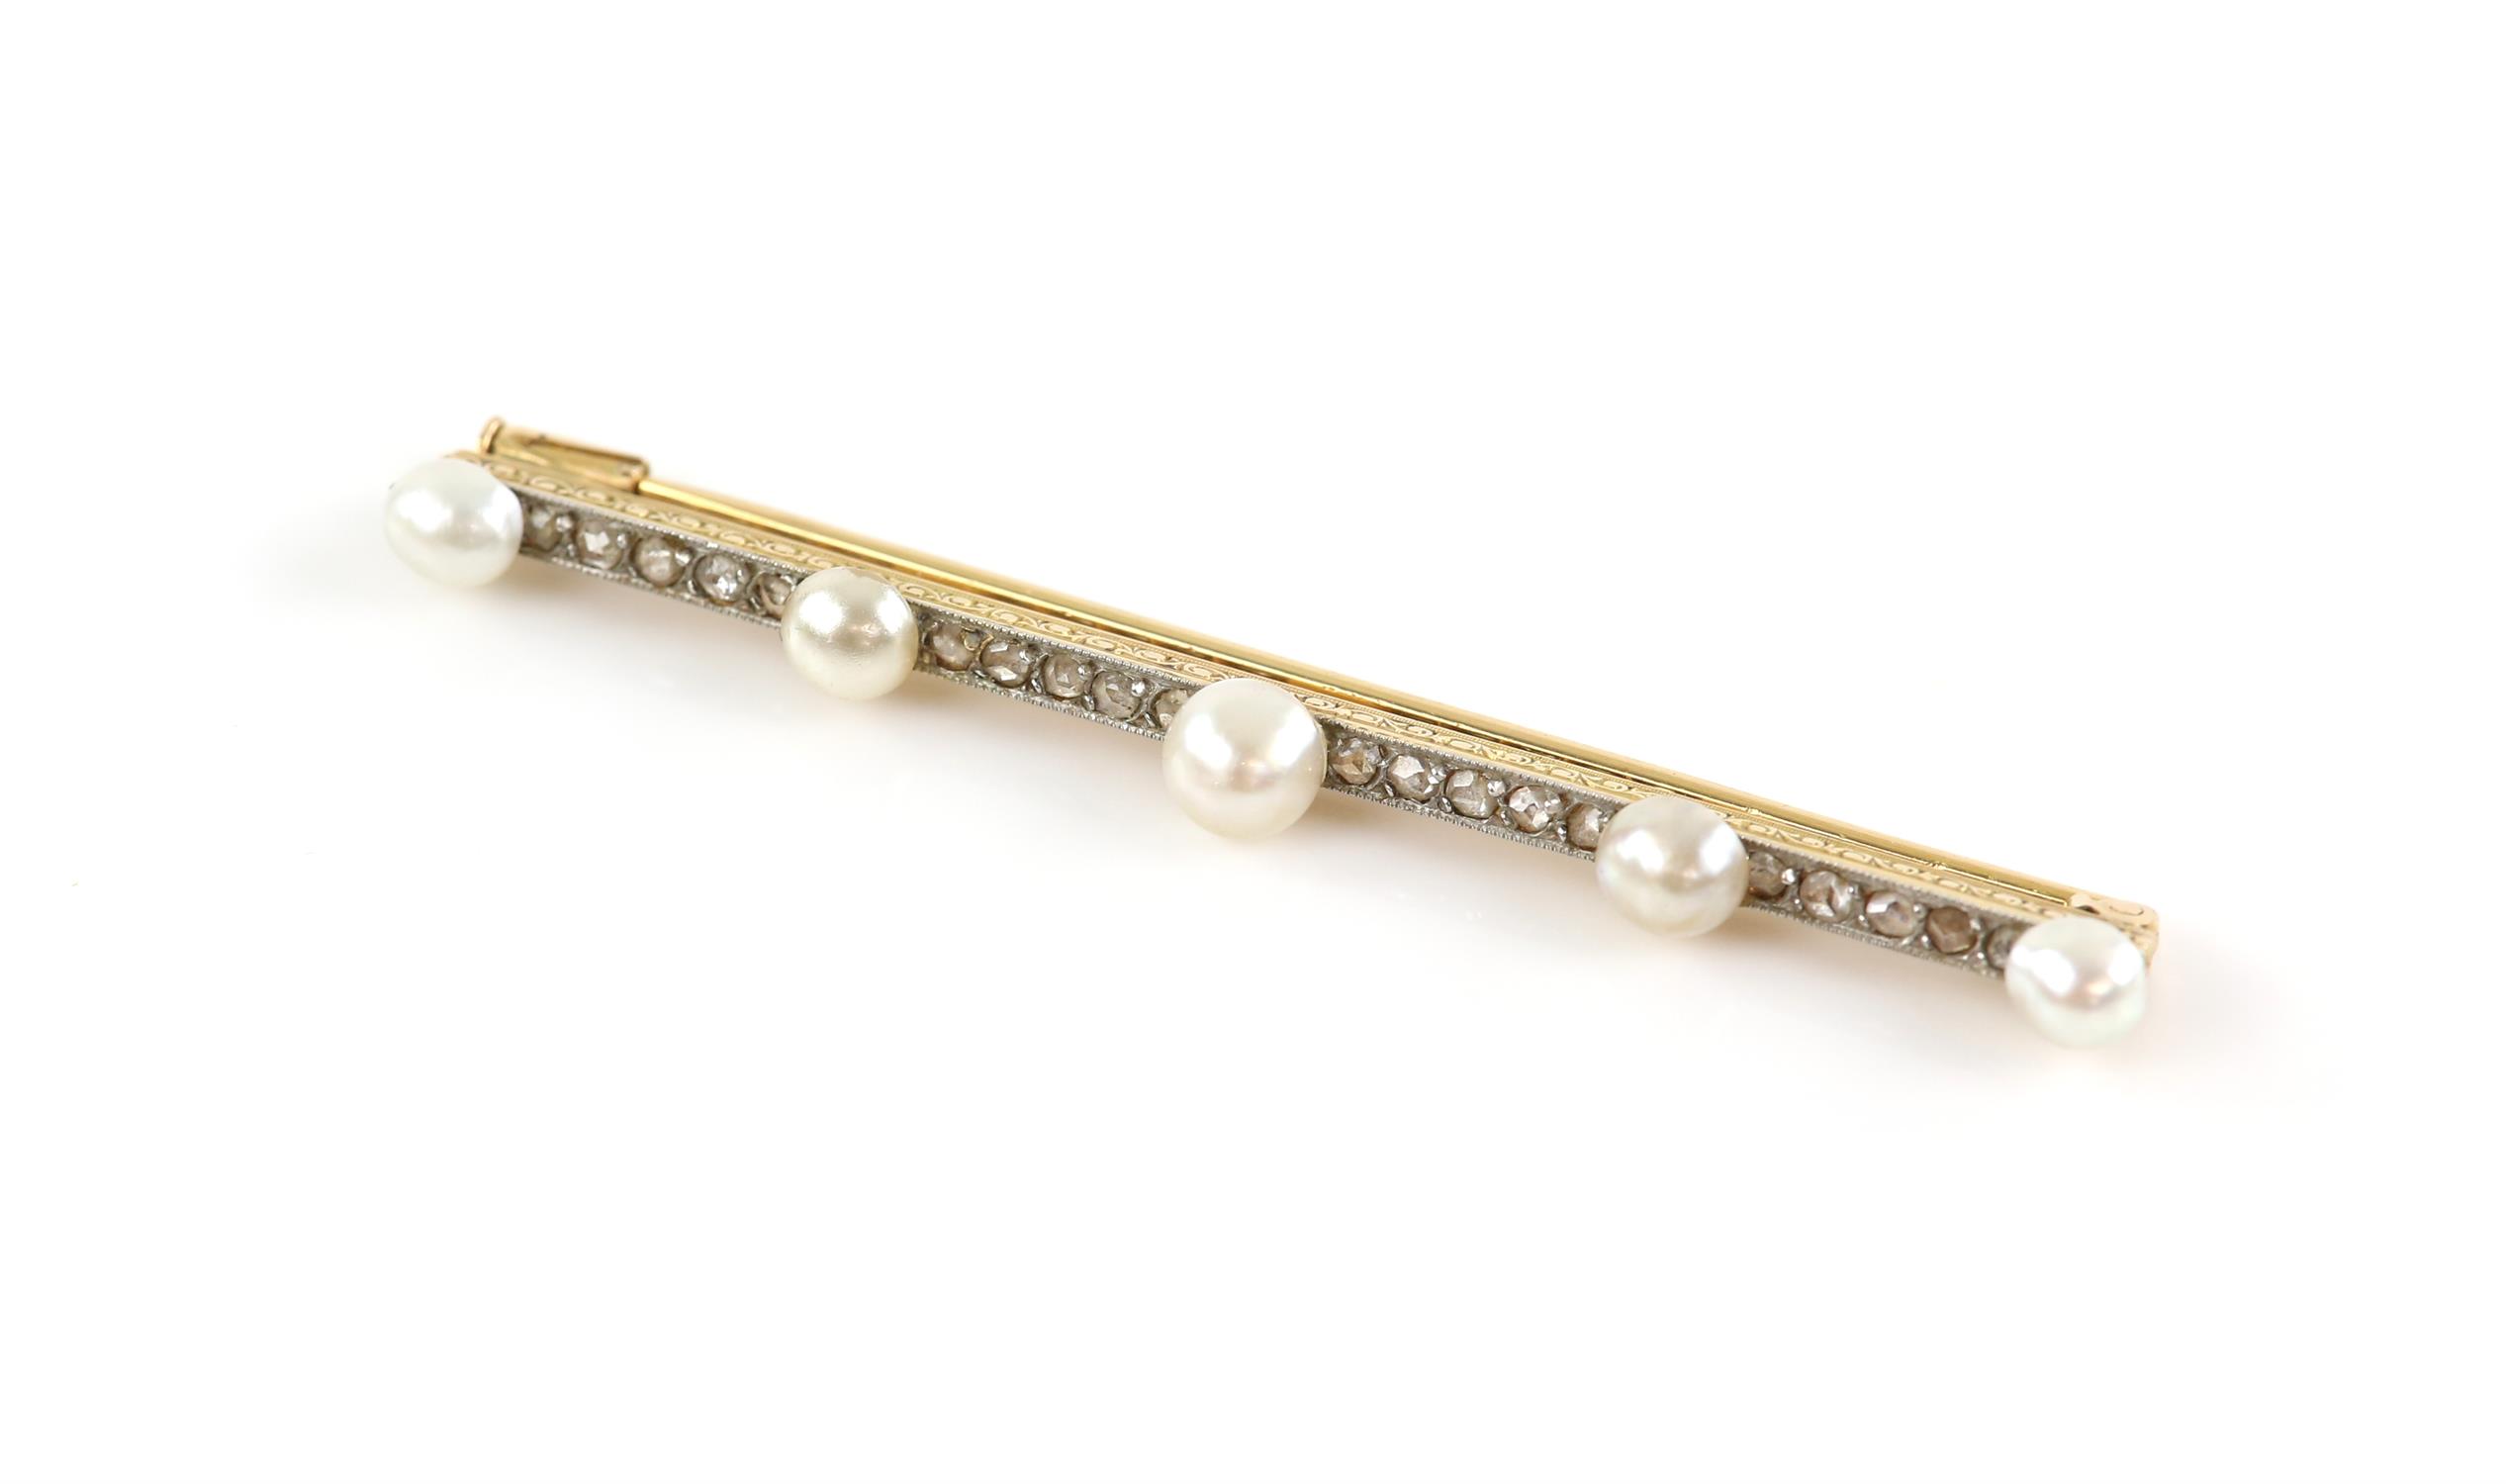 Edwardian pearl and diamond bar brooch, set with five bouton pearls, measuring from 4.7-5.9mm,